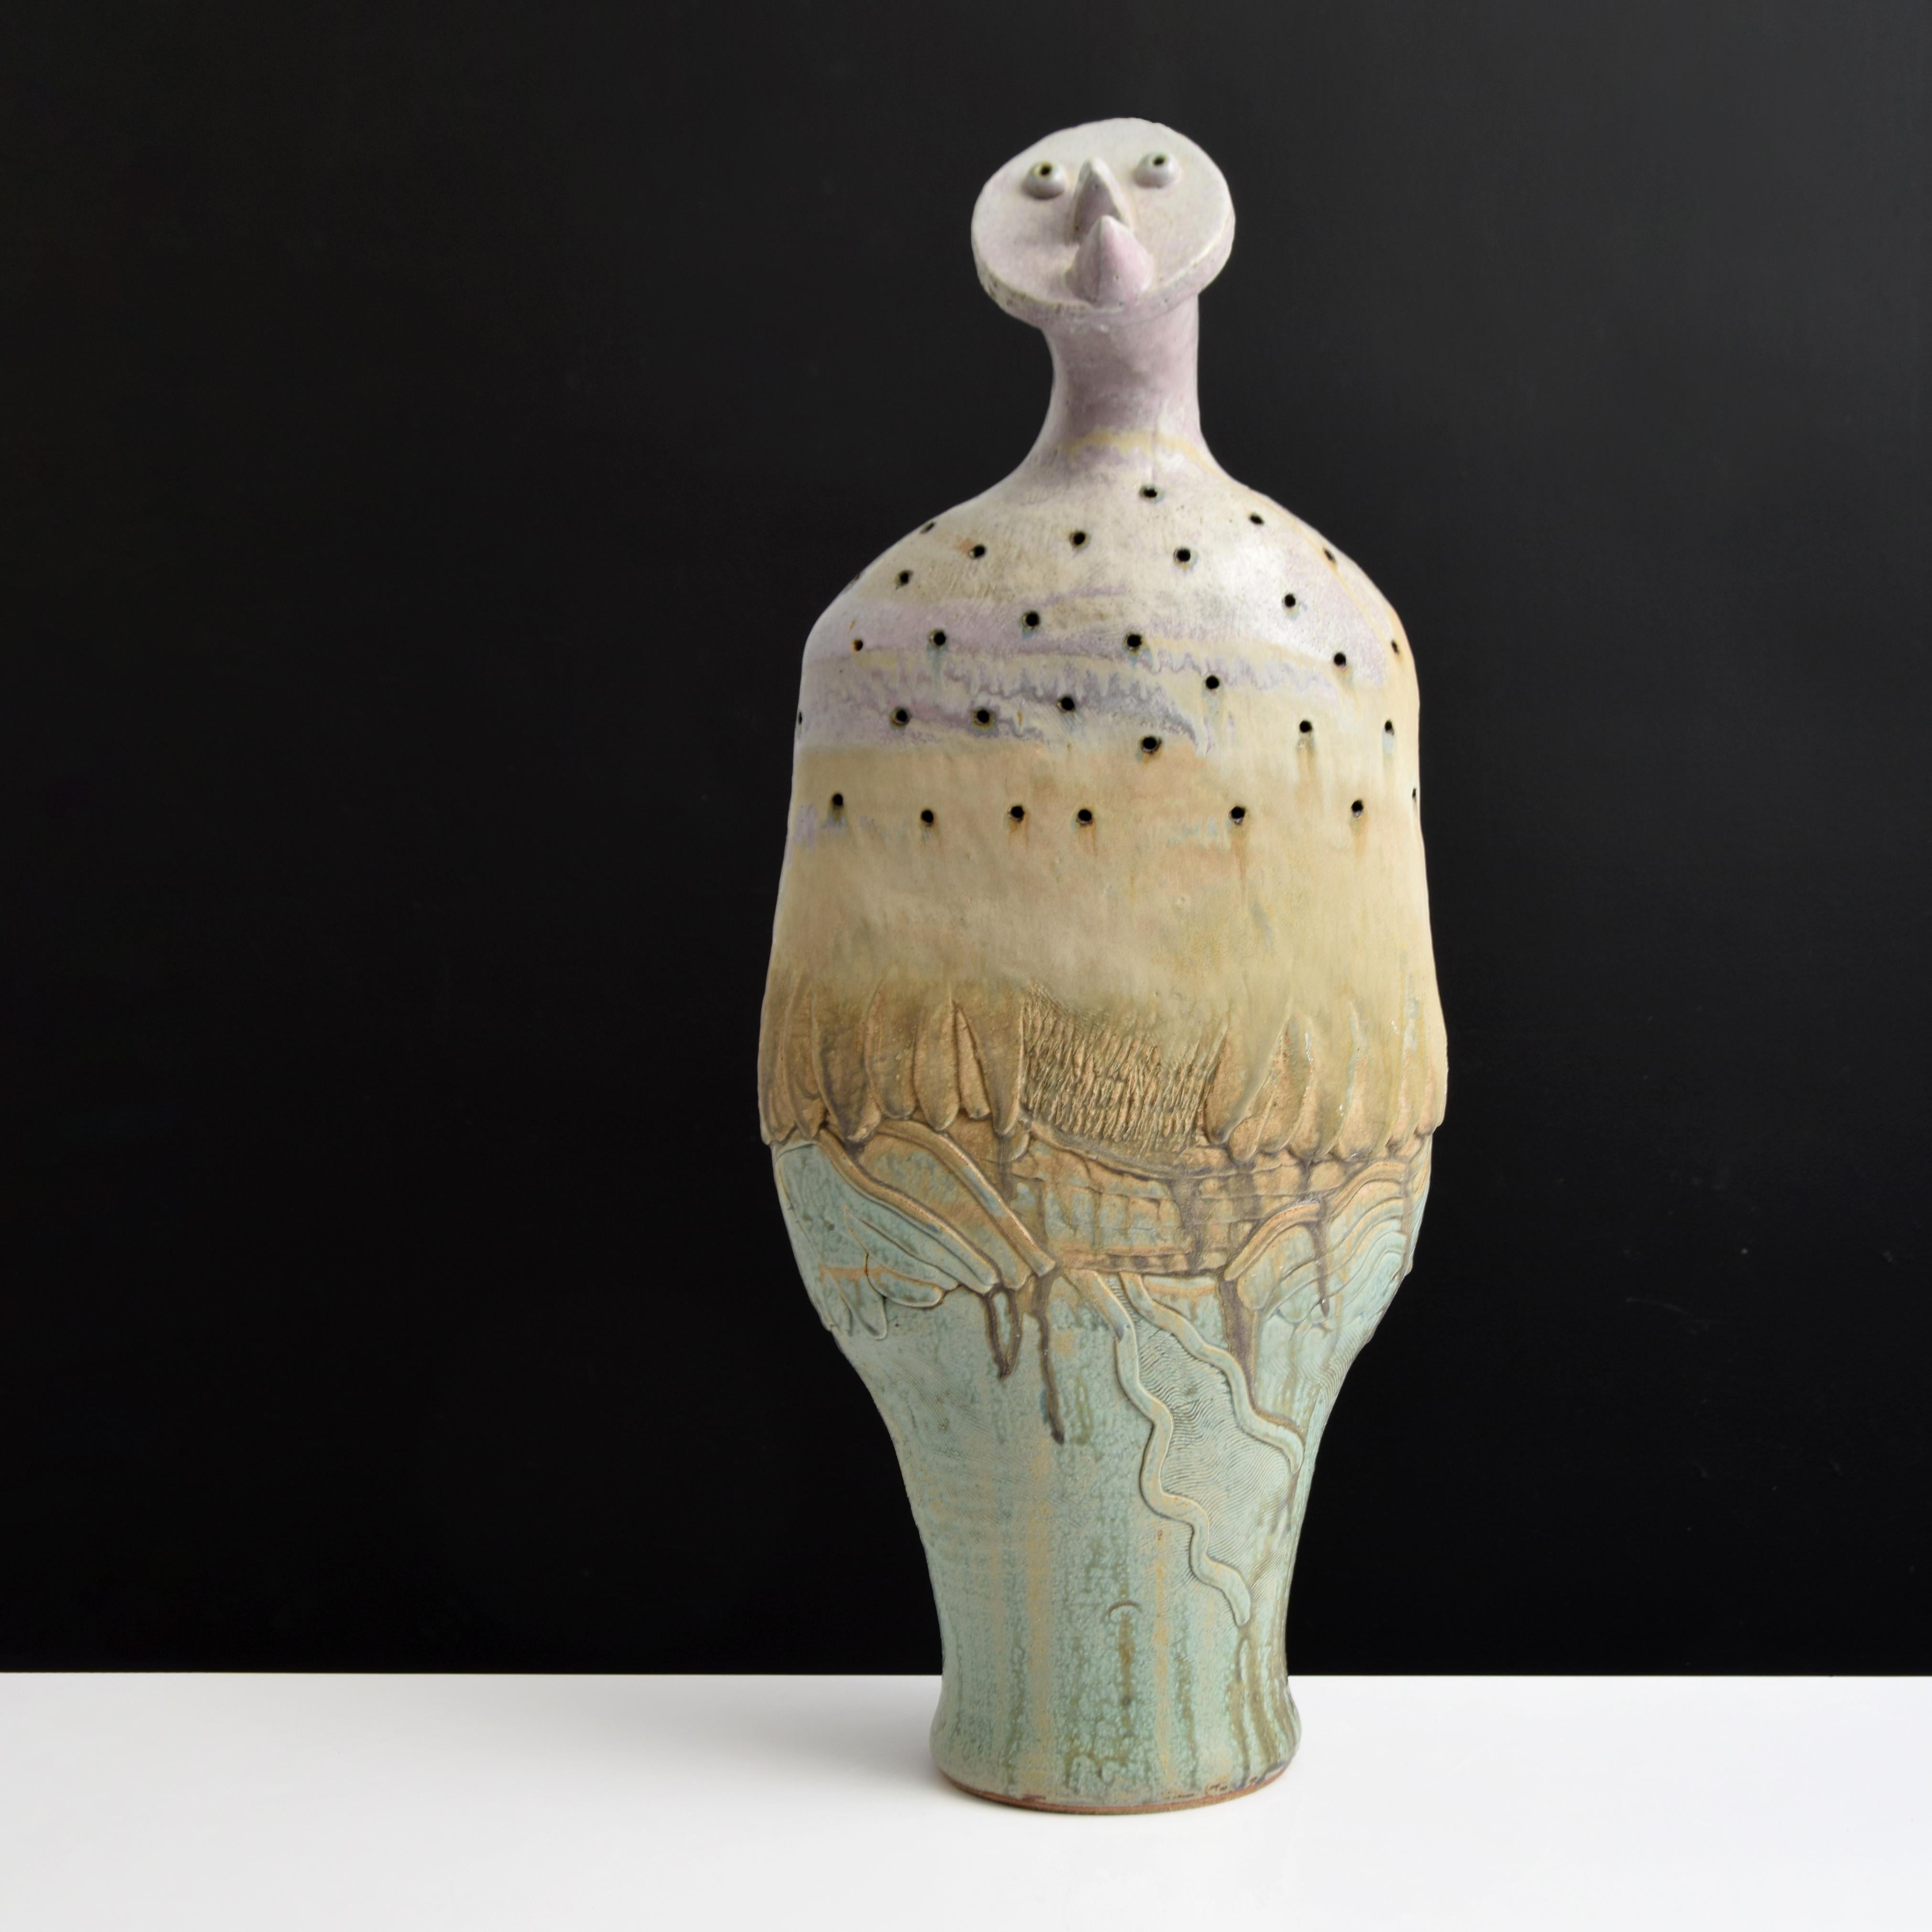 Additional Information: Tom Suomalainen is a ceramic artist known for his creative and imaginative sculptures.

Marking(s); notes: signed

Country of origin; materials: USA; stoneware